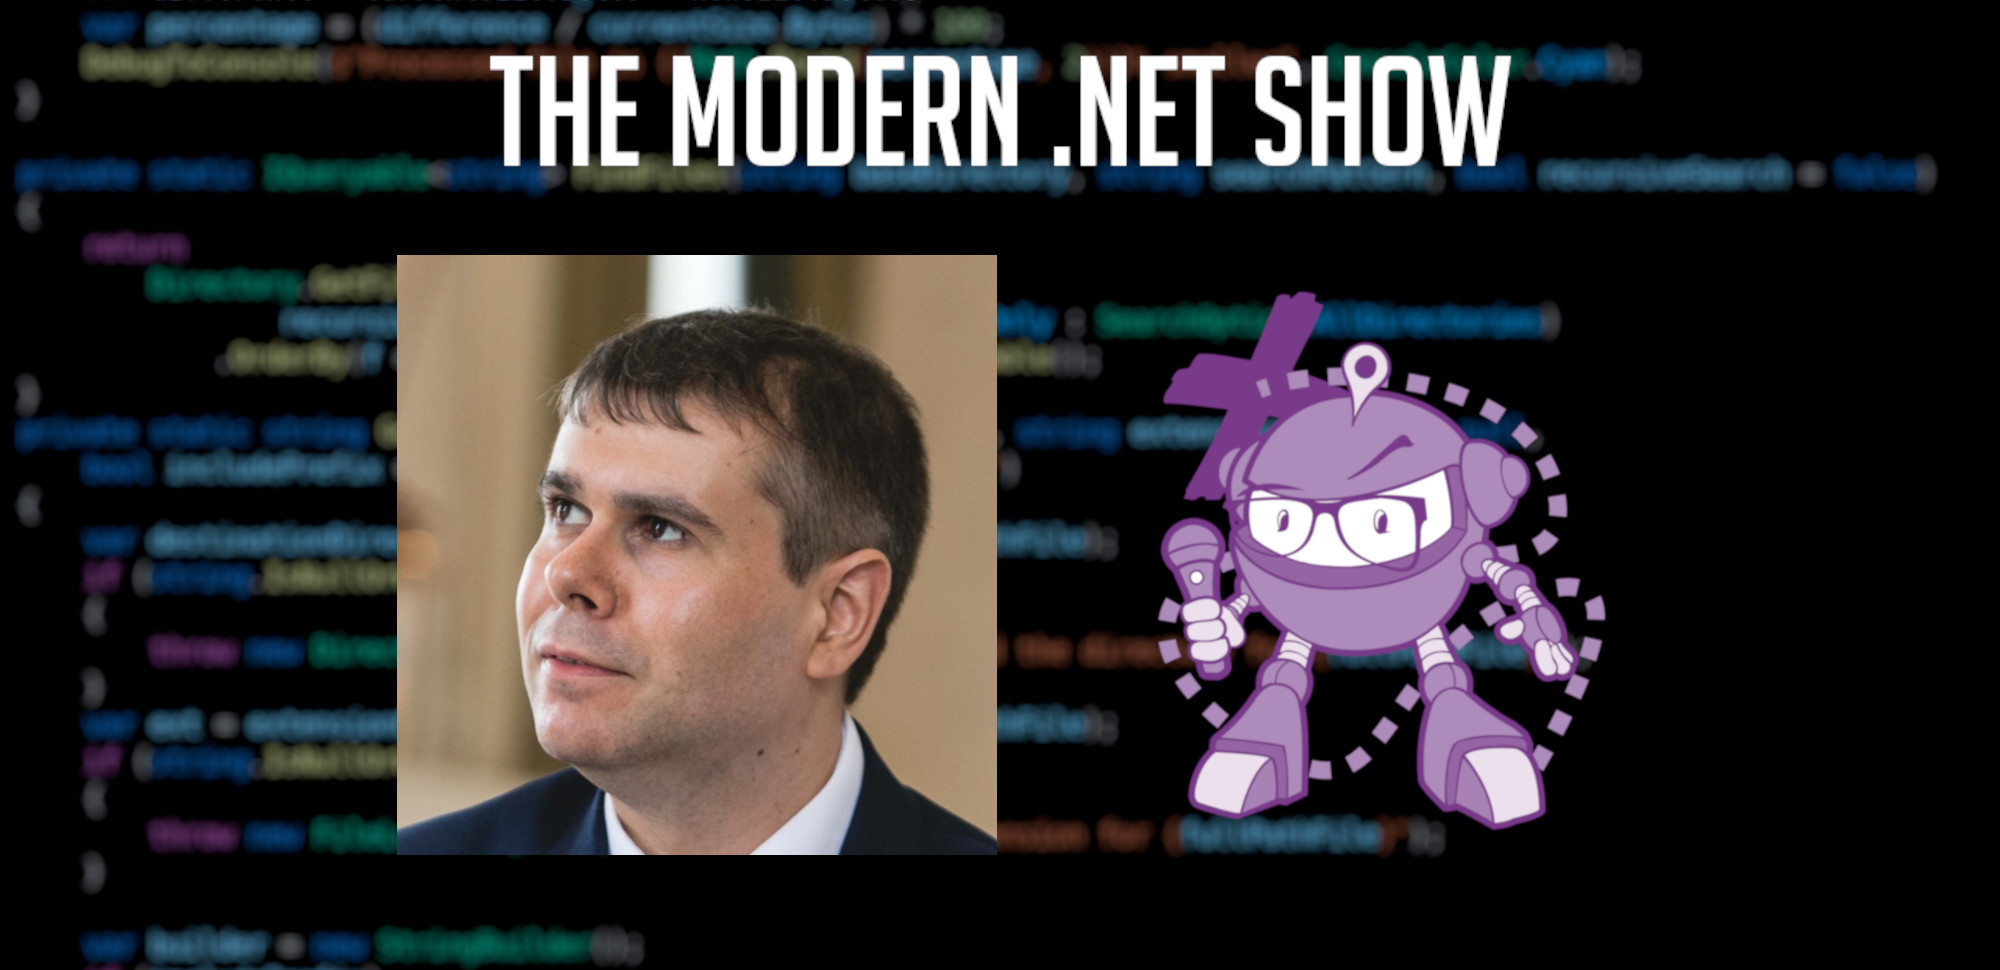 A blurry image of source code, too blurry to read, take the place of the background. Layered over that are the headshot of Peter Bull and a purple robot holding a microphone; these are on either side of the centre of the image. Above both is the heading 'THE MODERN .NET SHOW' in bold, white text.